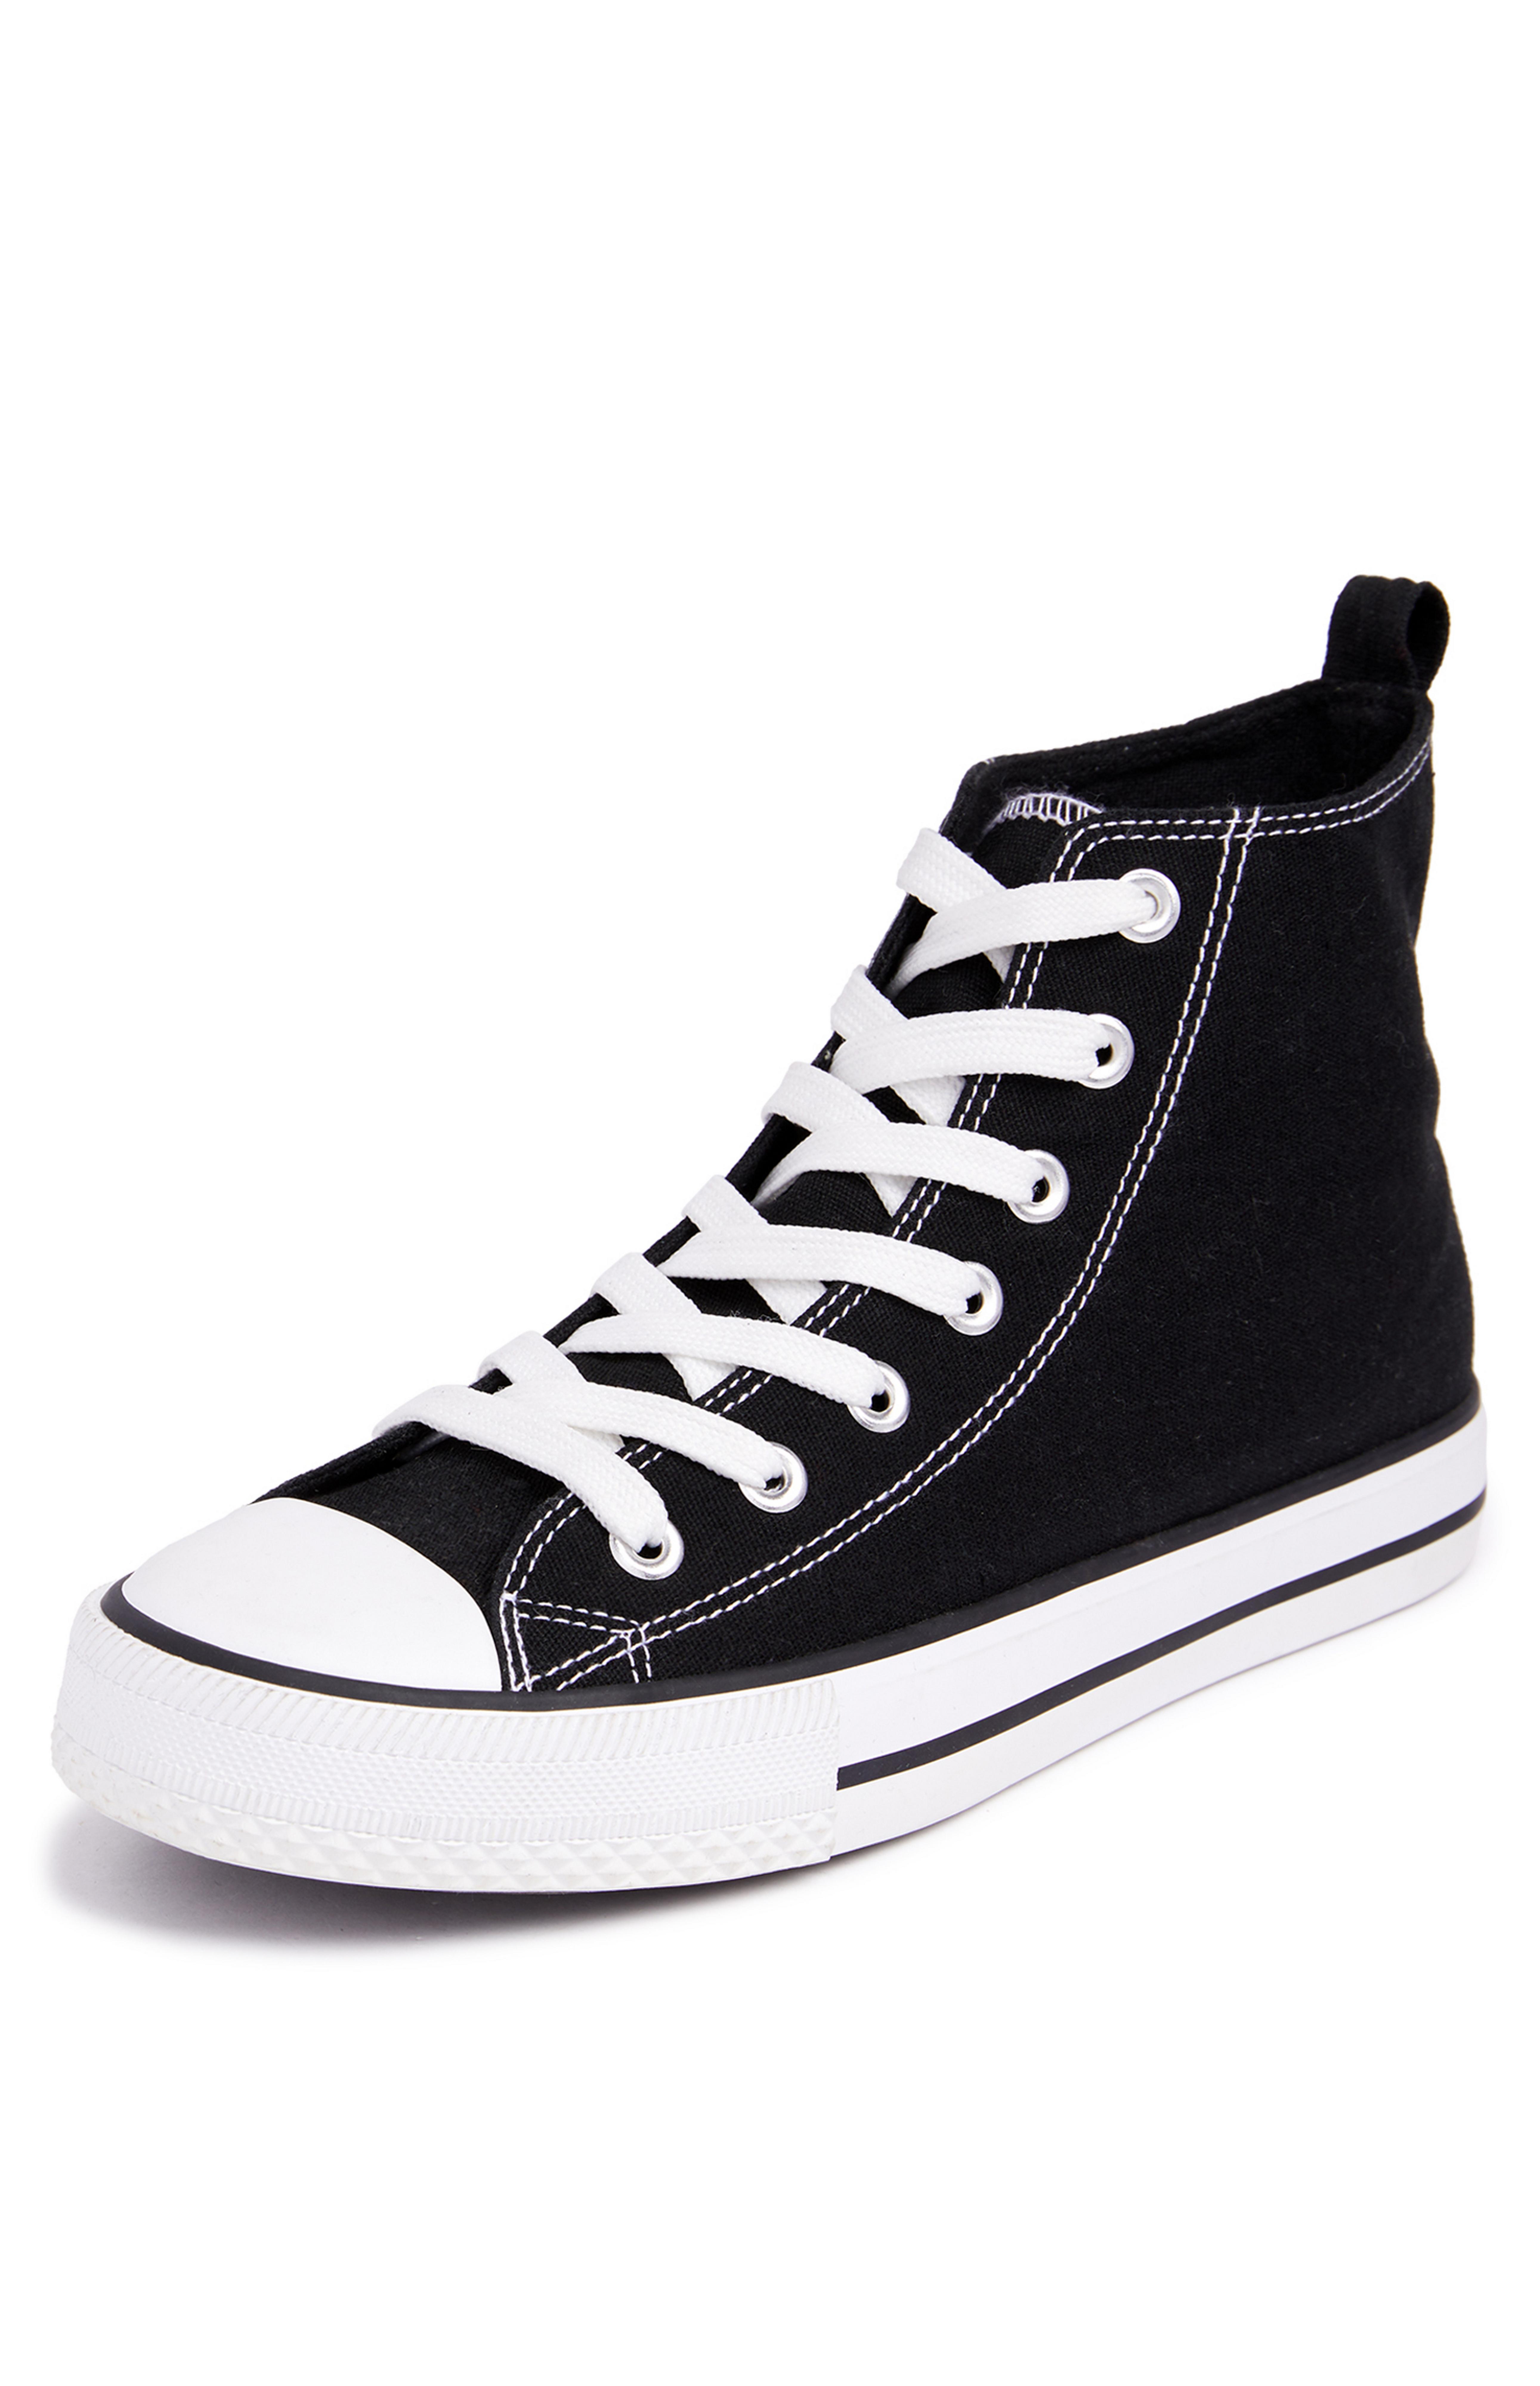 primark converse style trainers